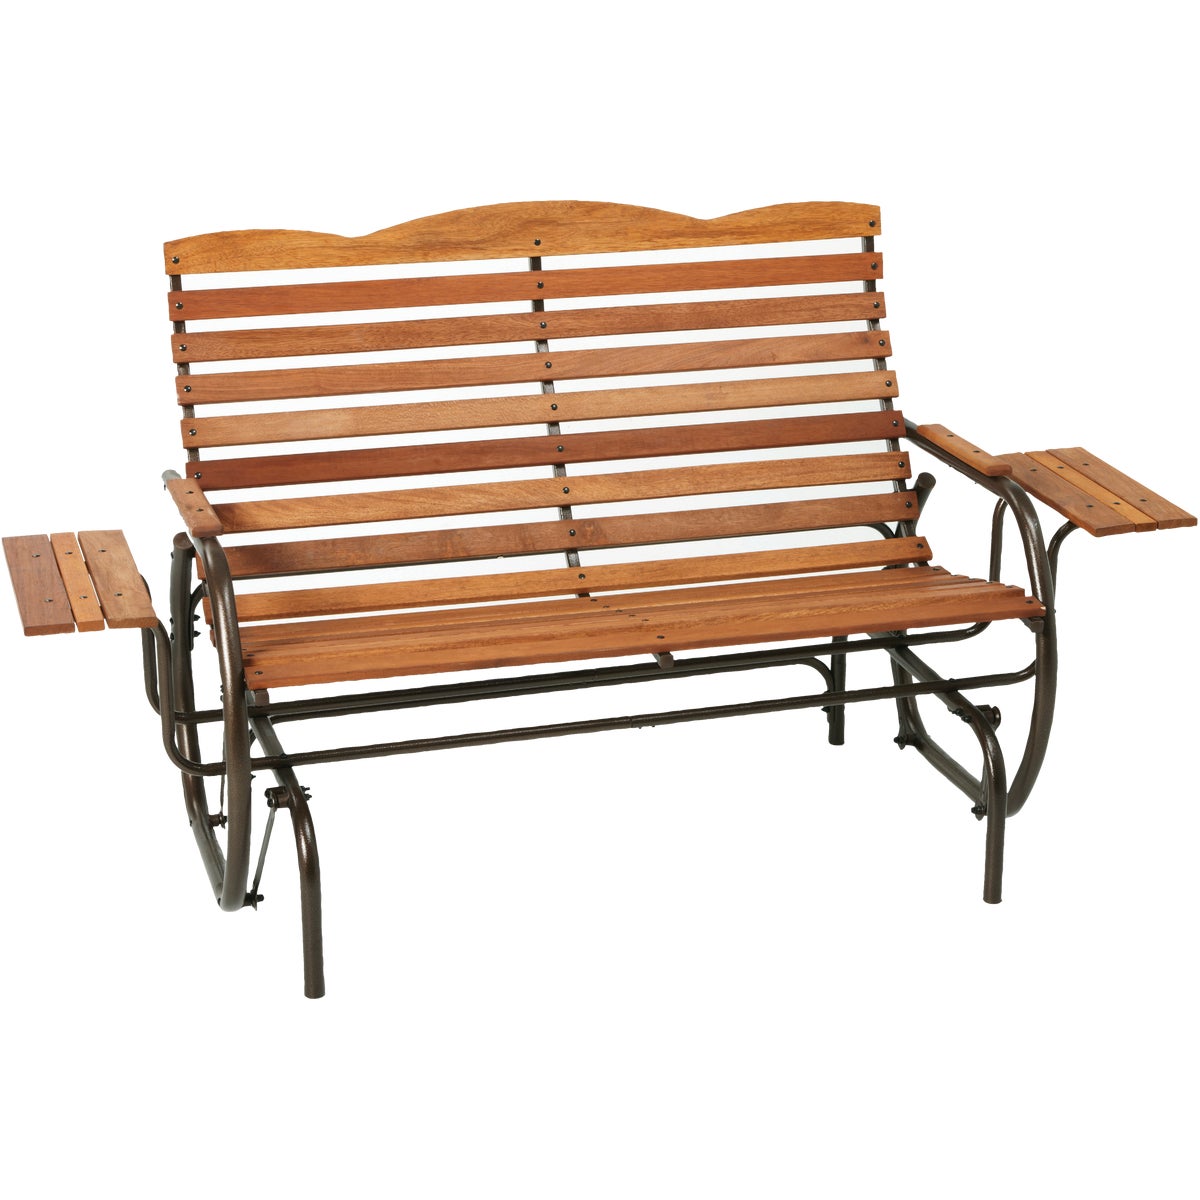 Item 817112, Durable gliding bench which provides comfort and functionality with a 